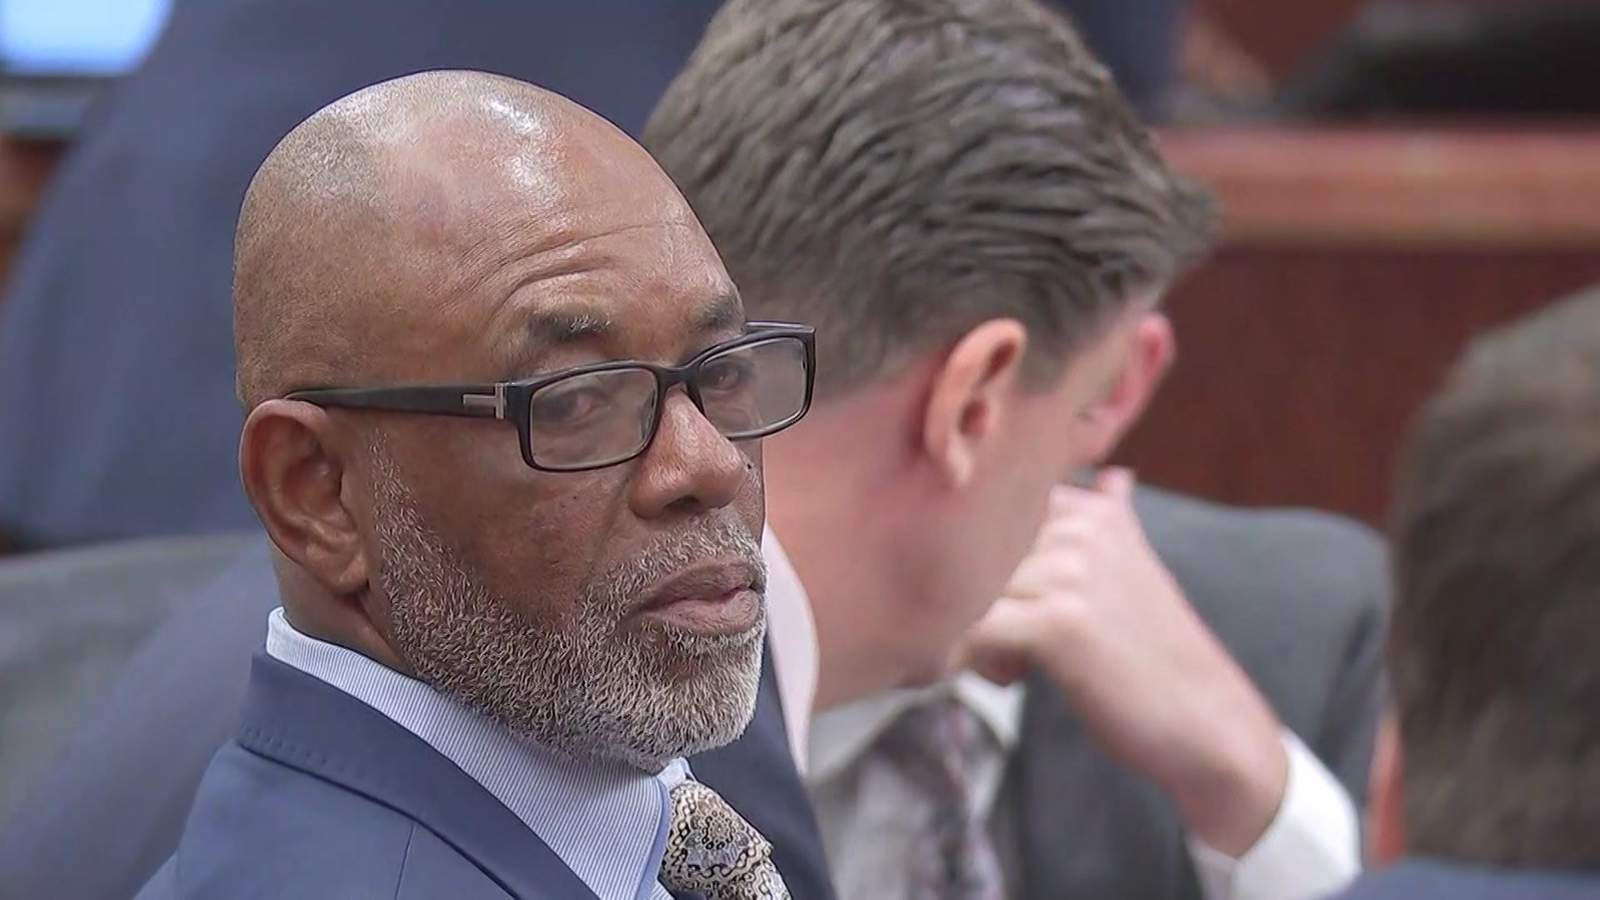 Judge to recommend man’s conviction be overturned after ex-HPD officer Gerald Goines gave false testimony